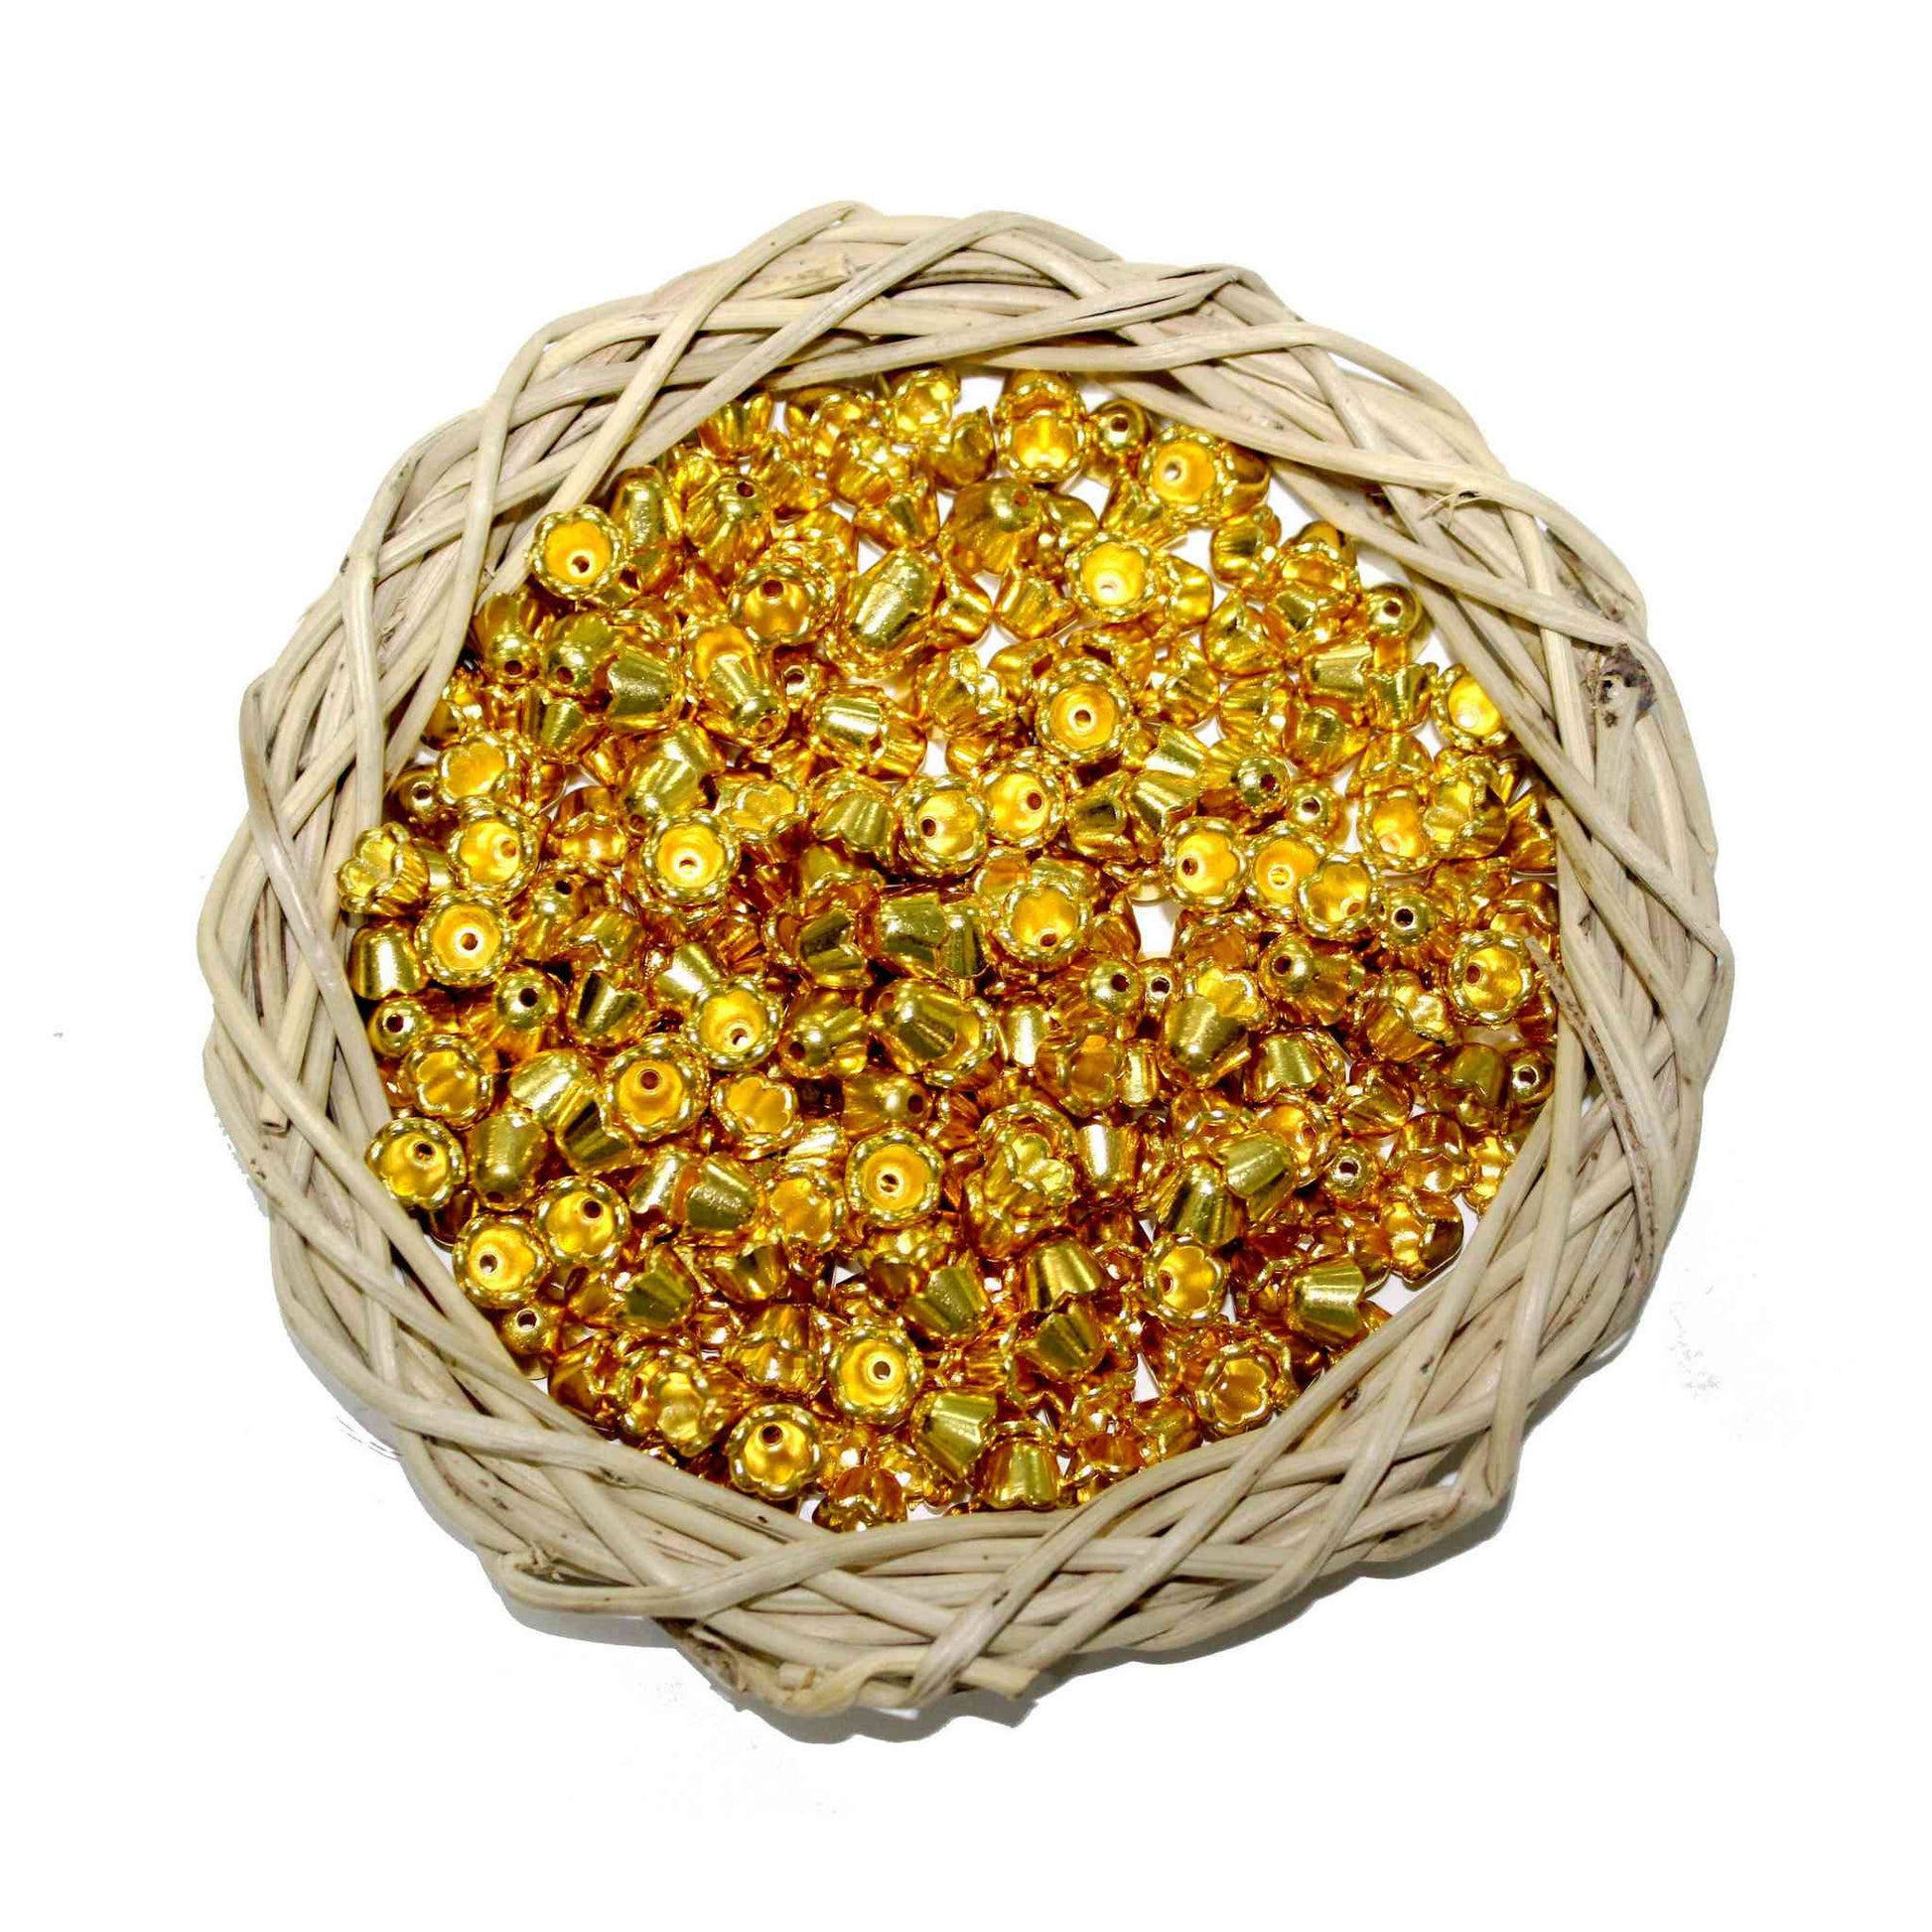 Indian Petals Premium quality Cap Bead for DIY Craft, Trousseau Packing or Decoration, Small - Indian Petals